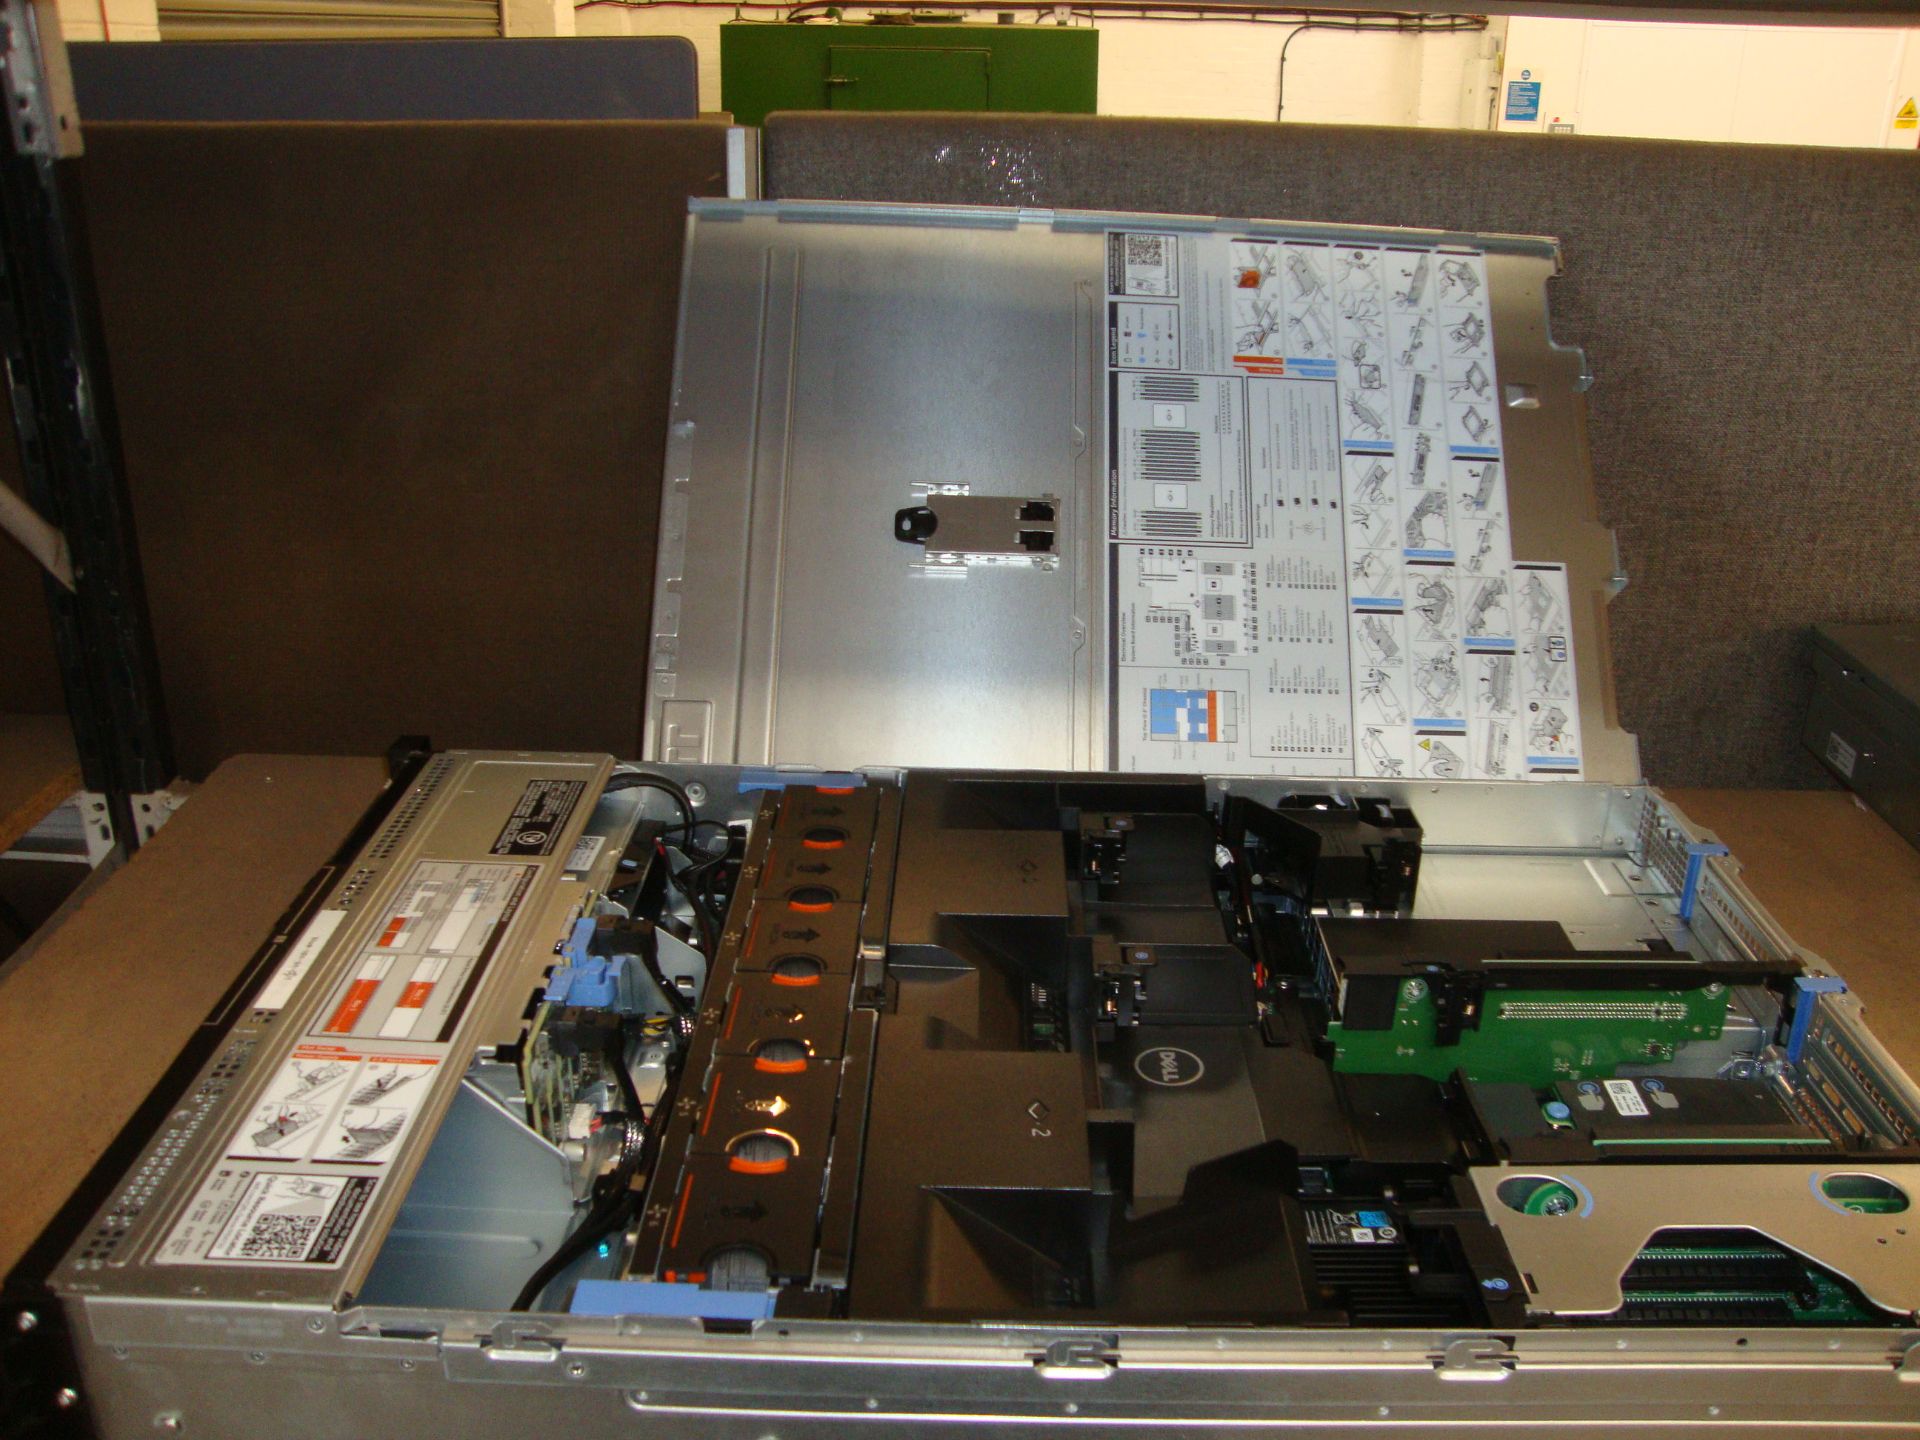 Dell PowerEdge model R730 server with twin Xeon 6 Core E5-2609 V3 1.9 GHz processors, 96Gb RAM, - Image 6 of 15